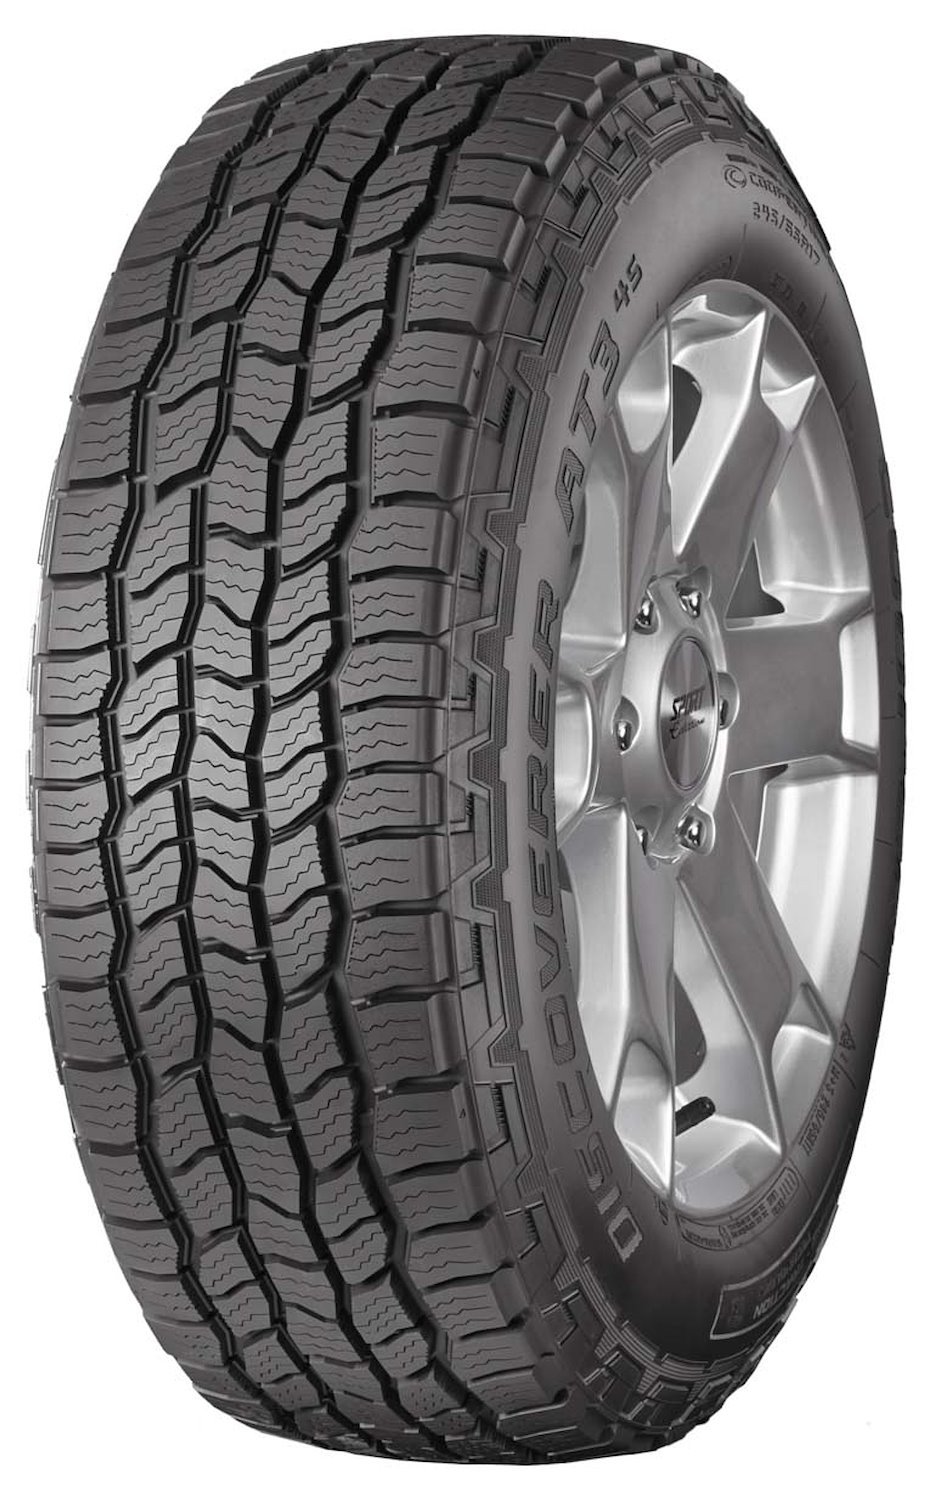 Discoverer AT3 4S All-Terrain Tire, 235/75R16